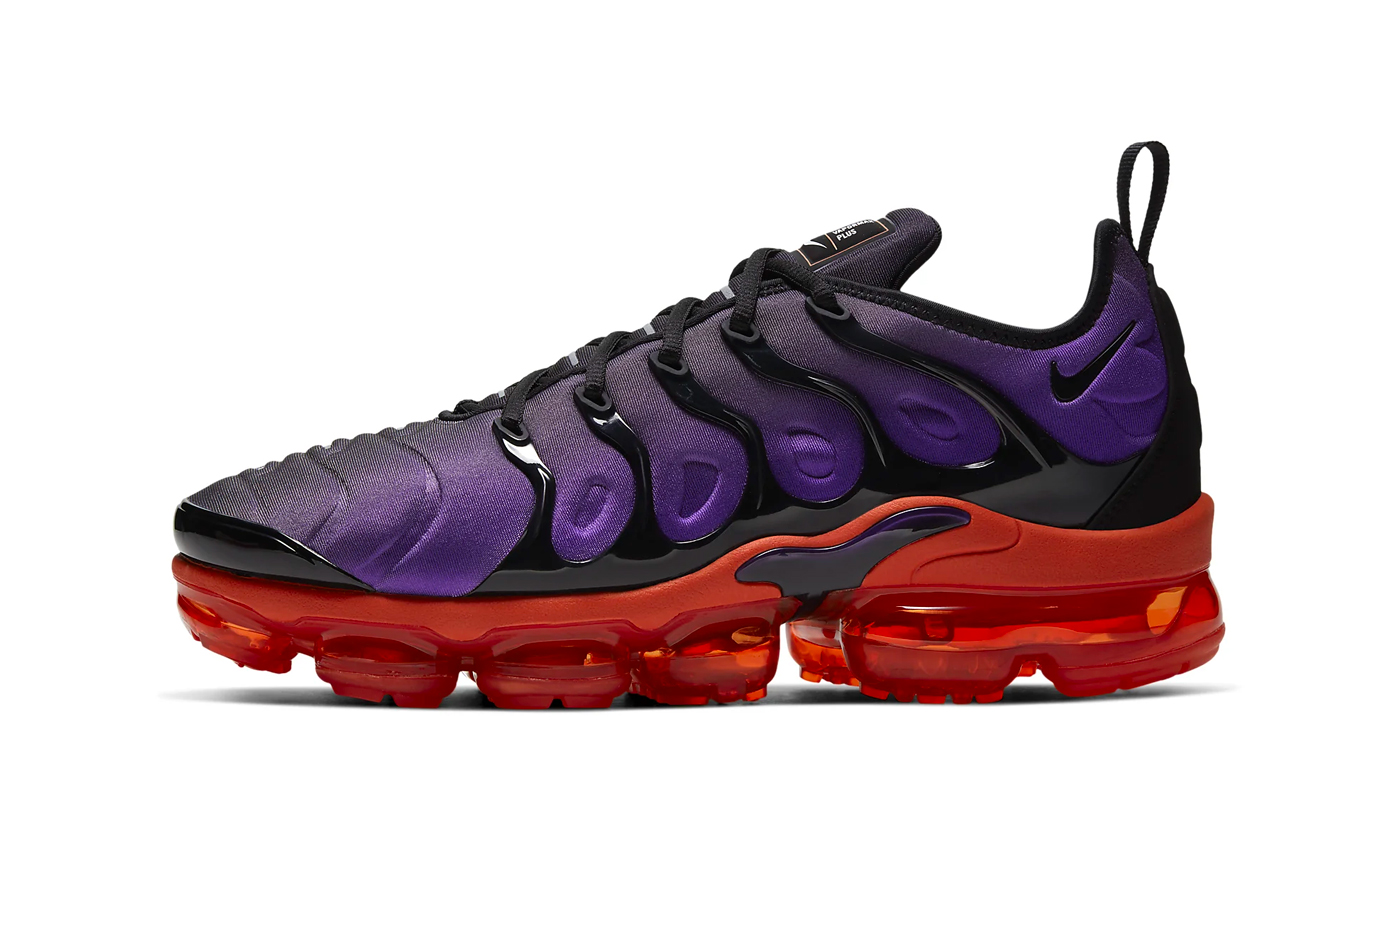 Nike Air VaporMax Plus Voltage Purple Release 924453-500 info Buy Cosmic Clay Reflect Silver Black